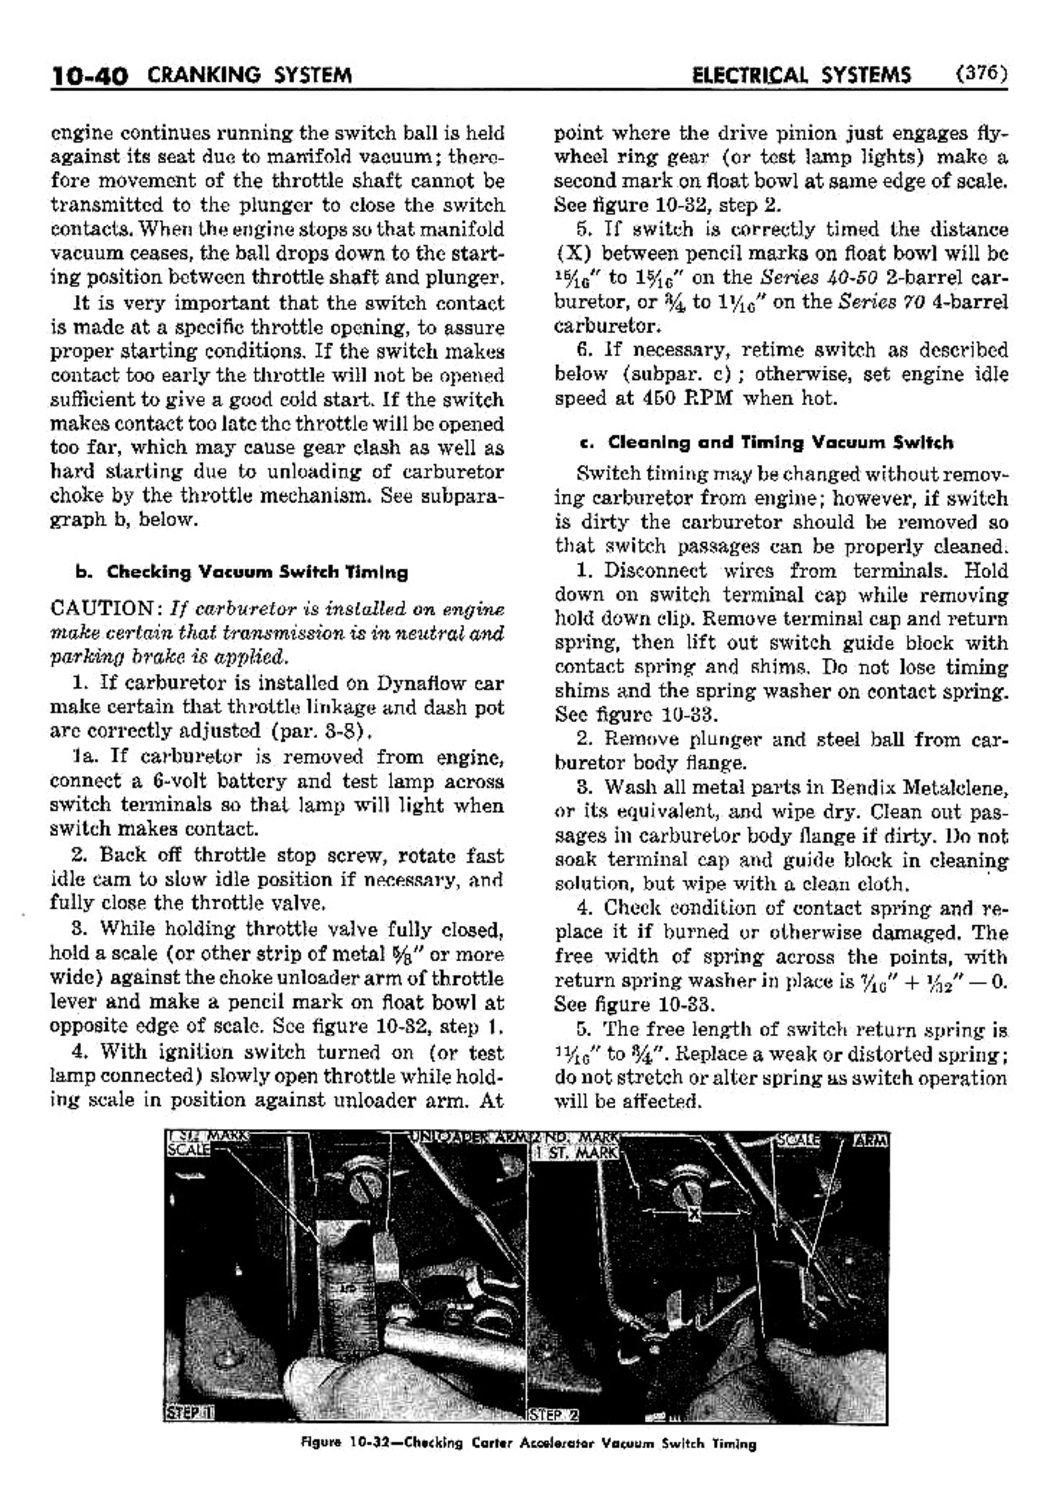 n_11 1952 Buick Shop Manual - Electrical Systems-040-040.jpg